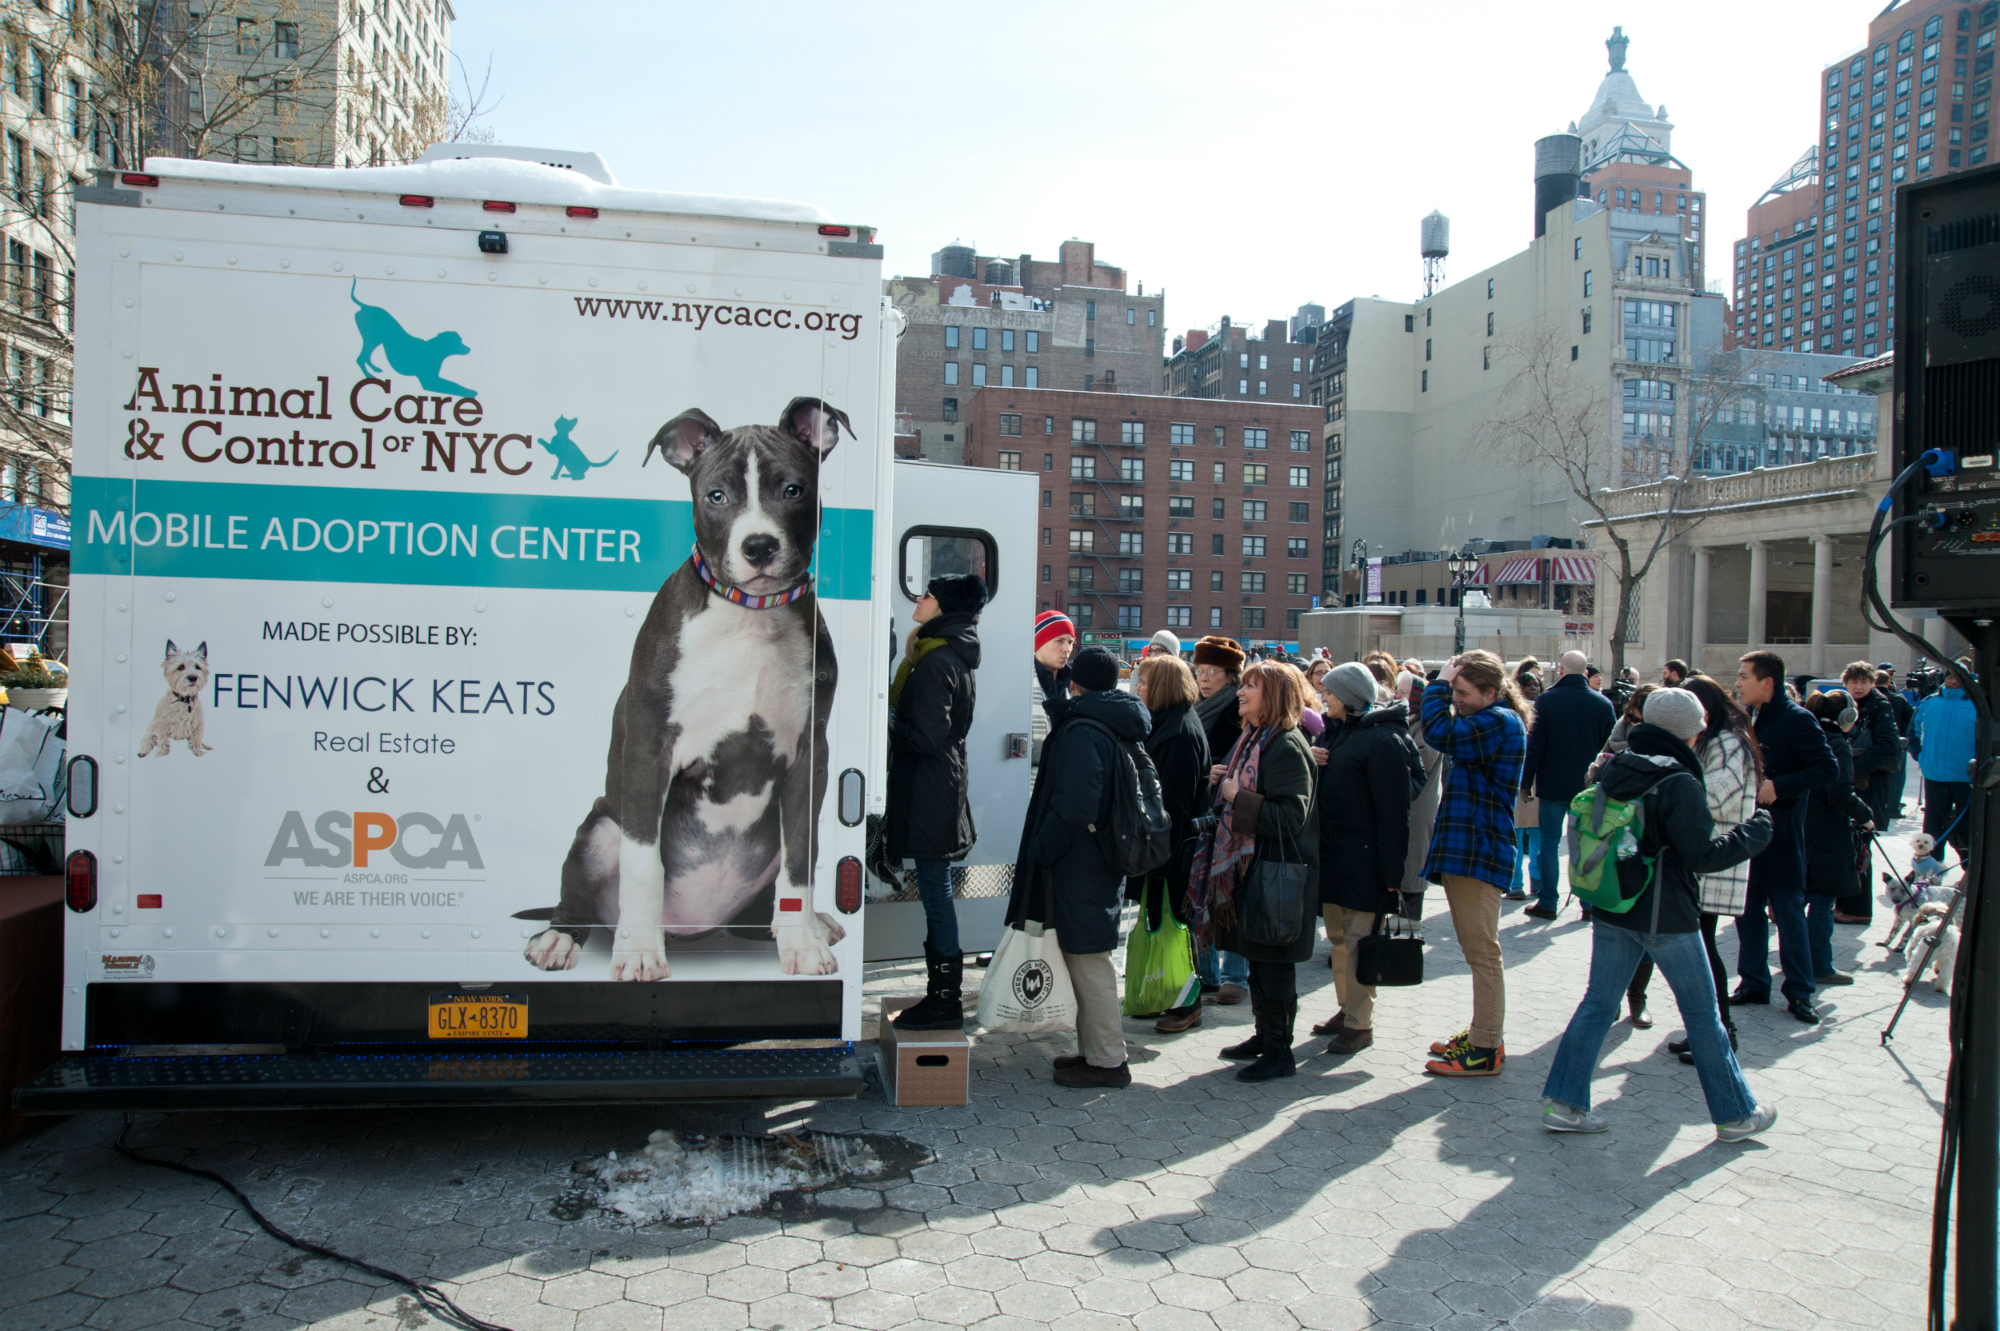 AC&C Unveils First Mobile Adoption Center - Animal Care Centers of NYC